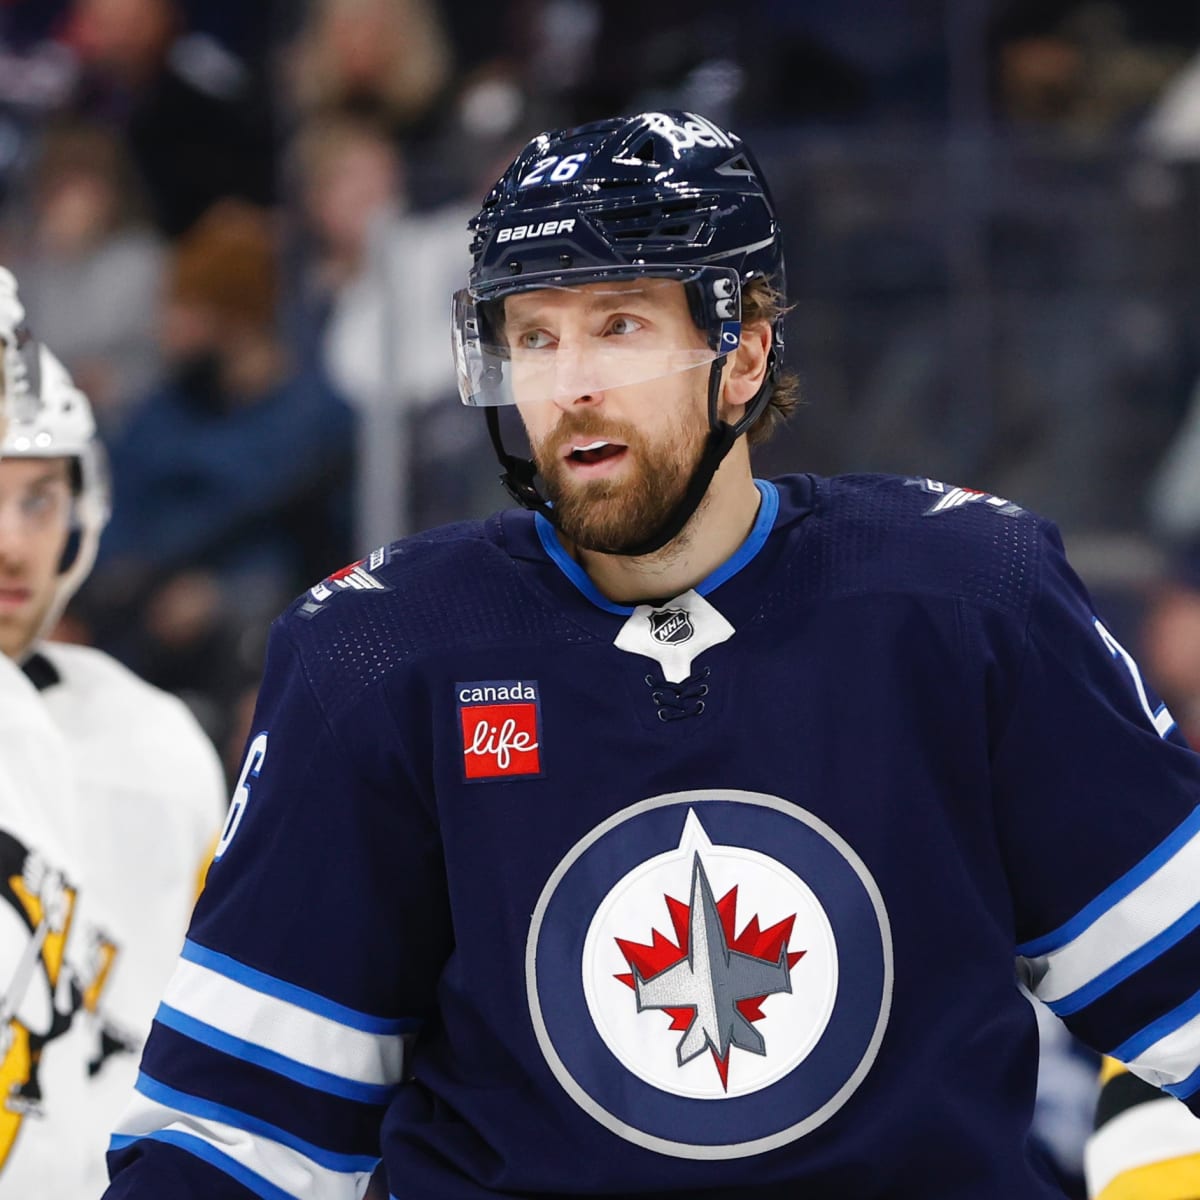 Jets to enter 2022-23 season without captain